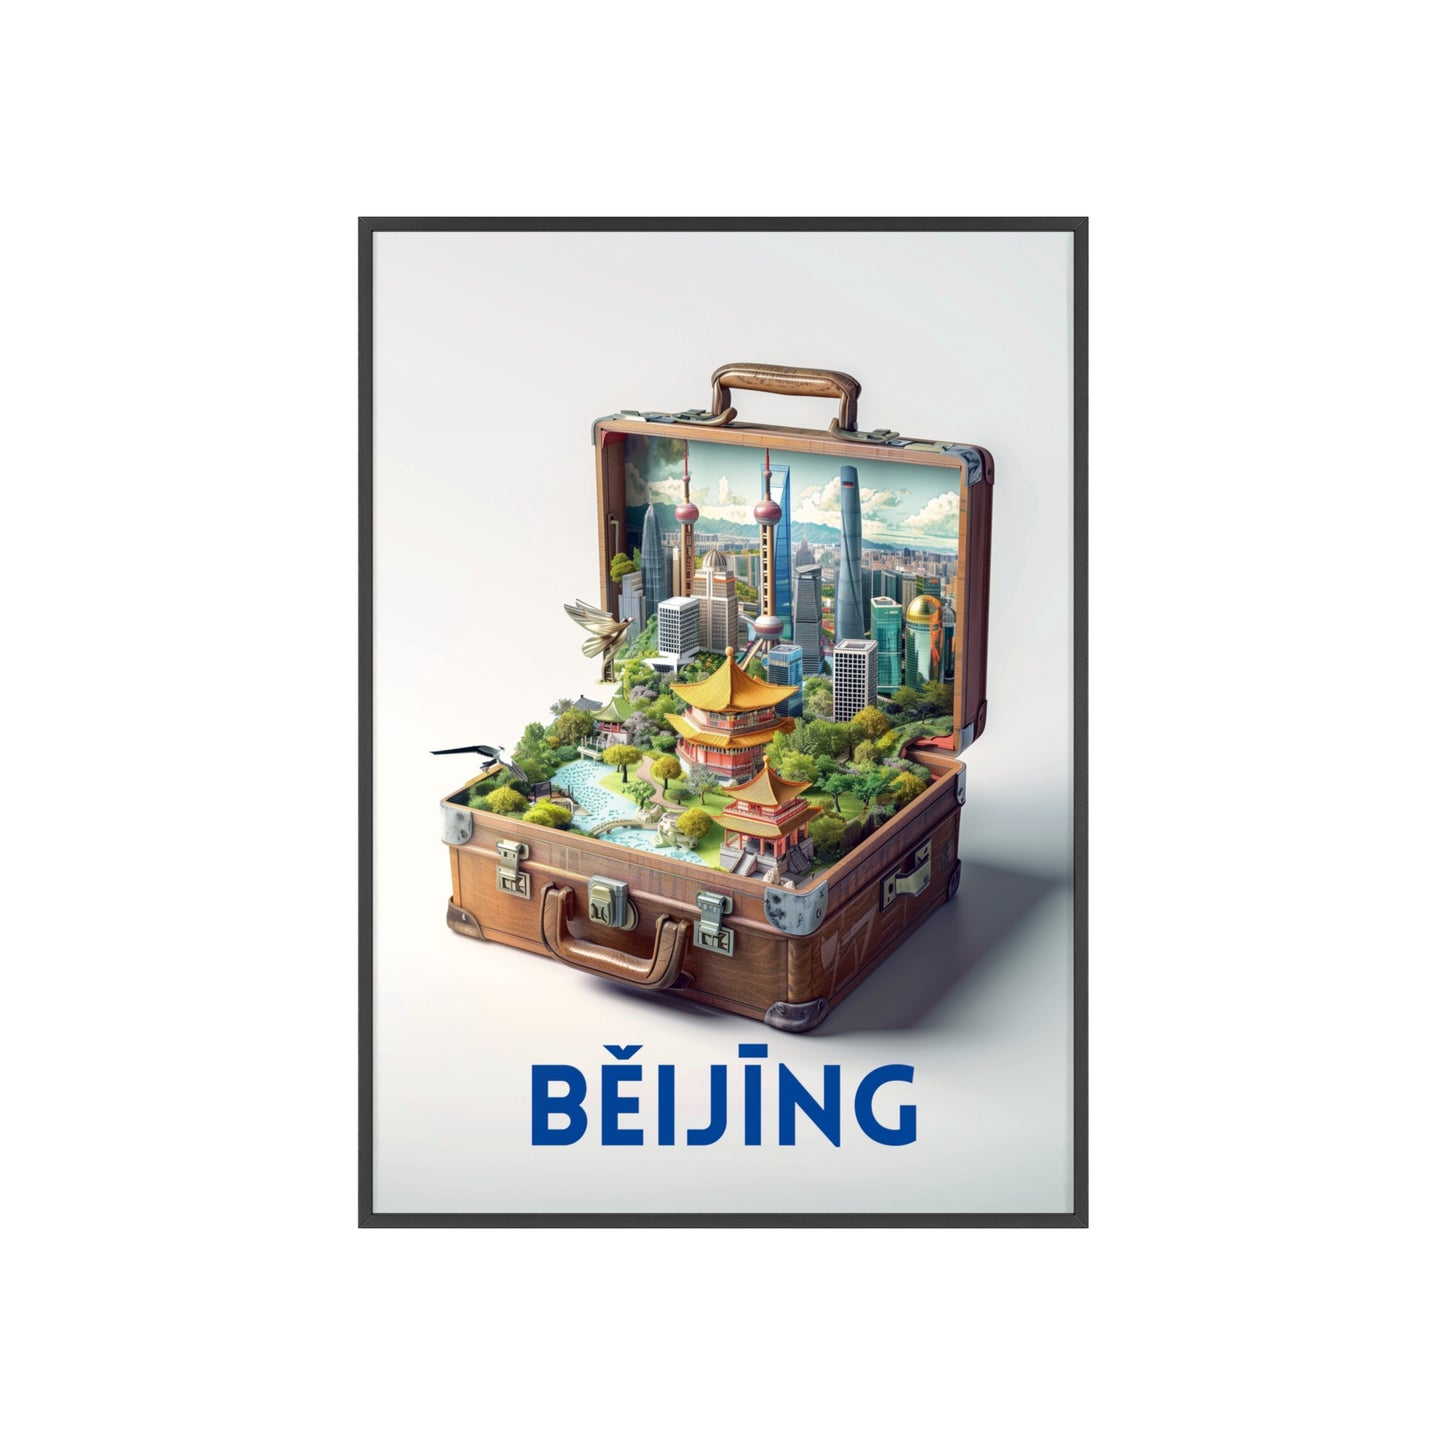 Stunning Beijing travel poster enhancing home decor with elegant wall art, capturing the city's charm and evoking memories and future adventures